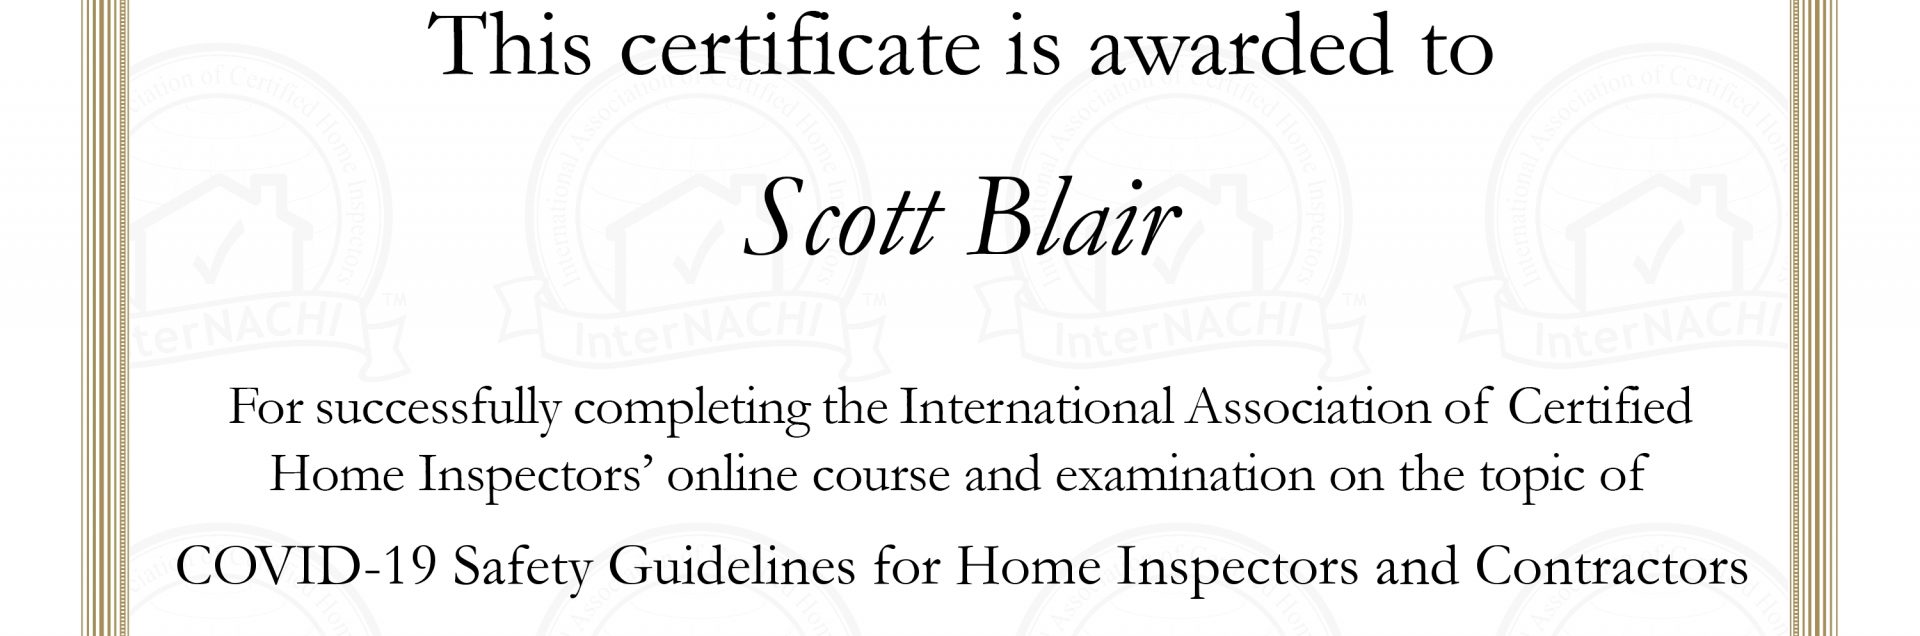 scott blair international association of home inspectors covid-19 safety guidelines certificate of completion